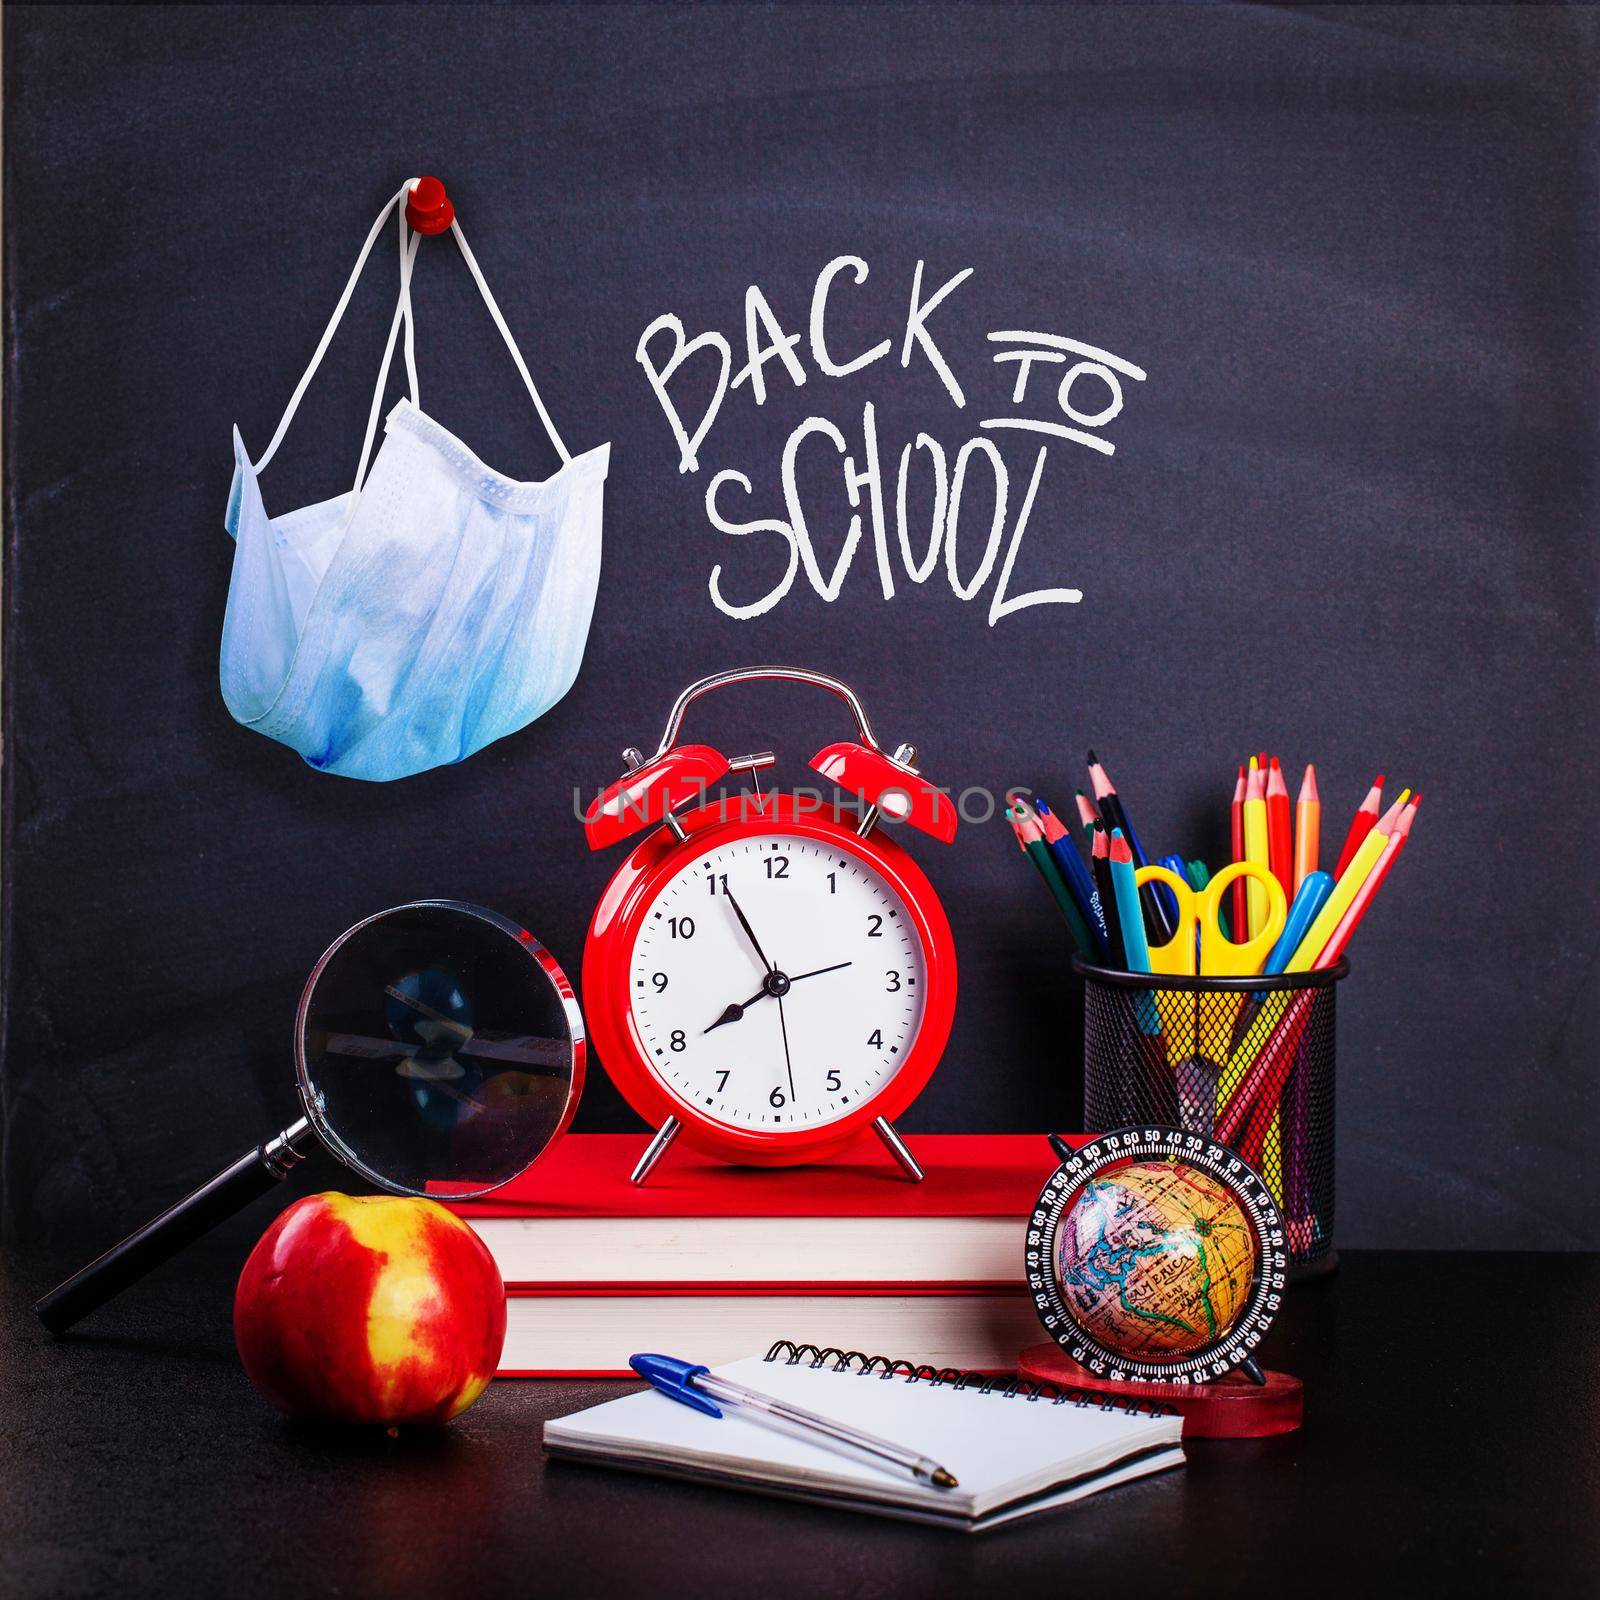 Welcome back to school after corona pandemic by Taut